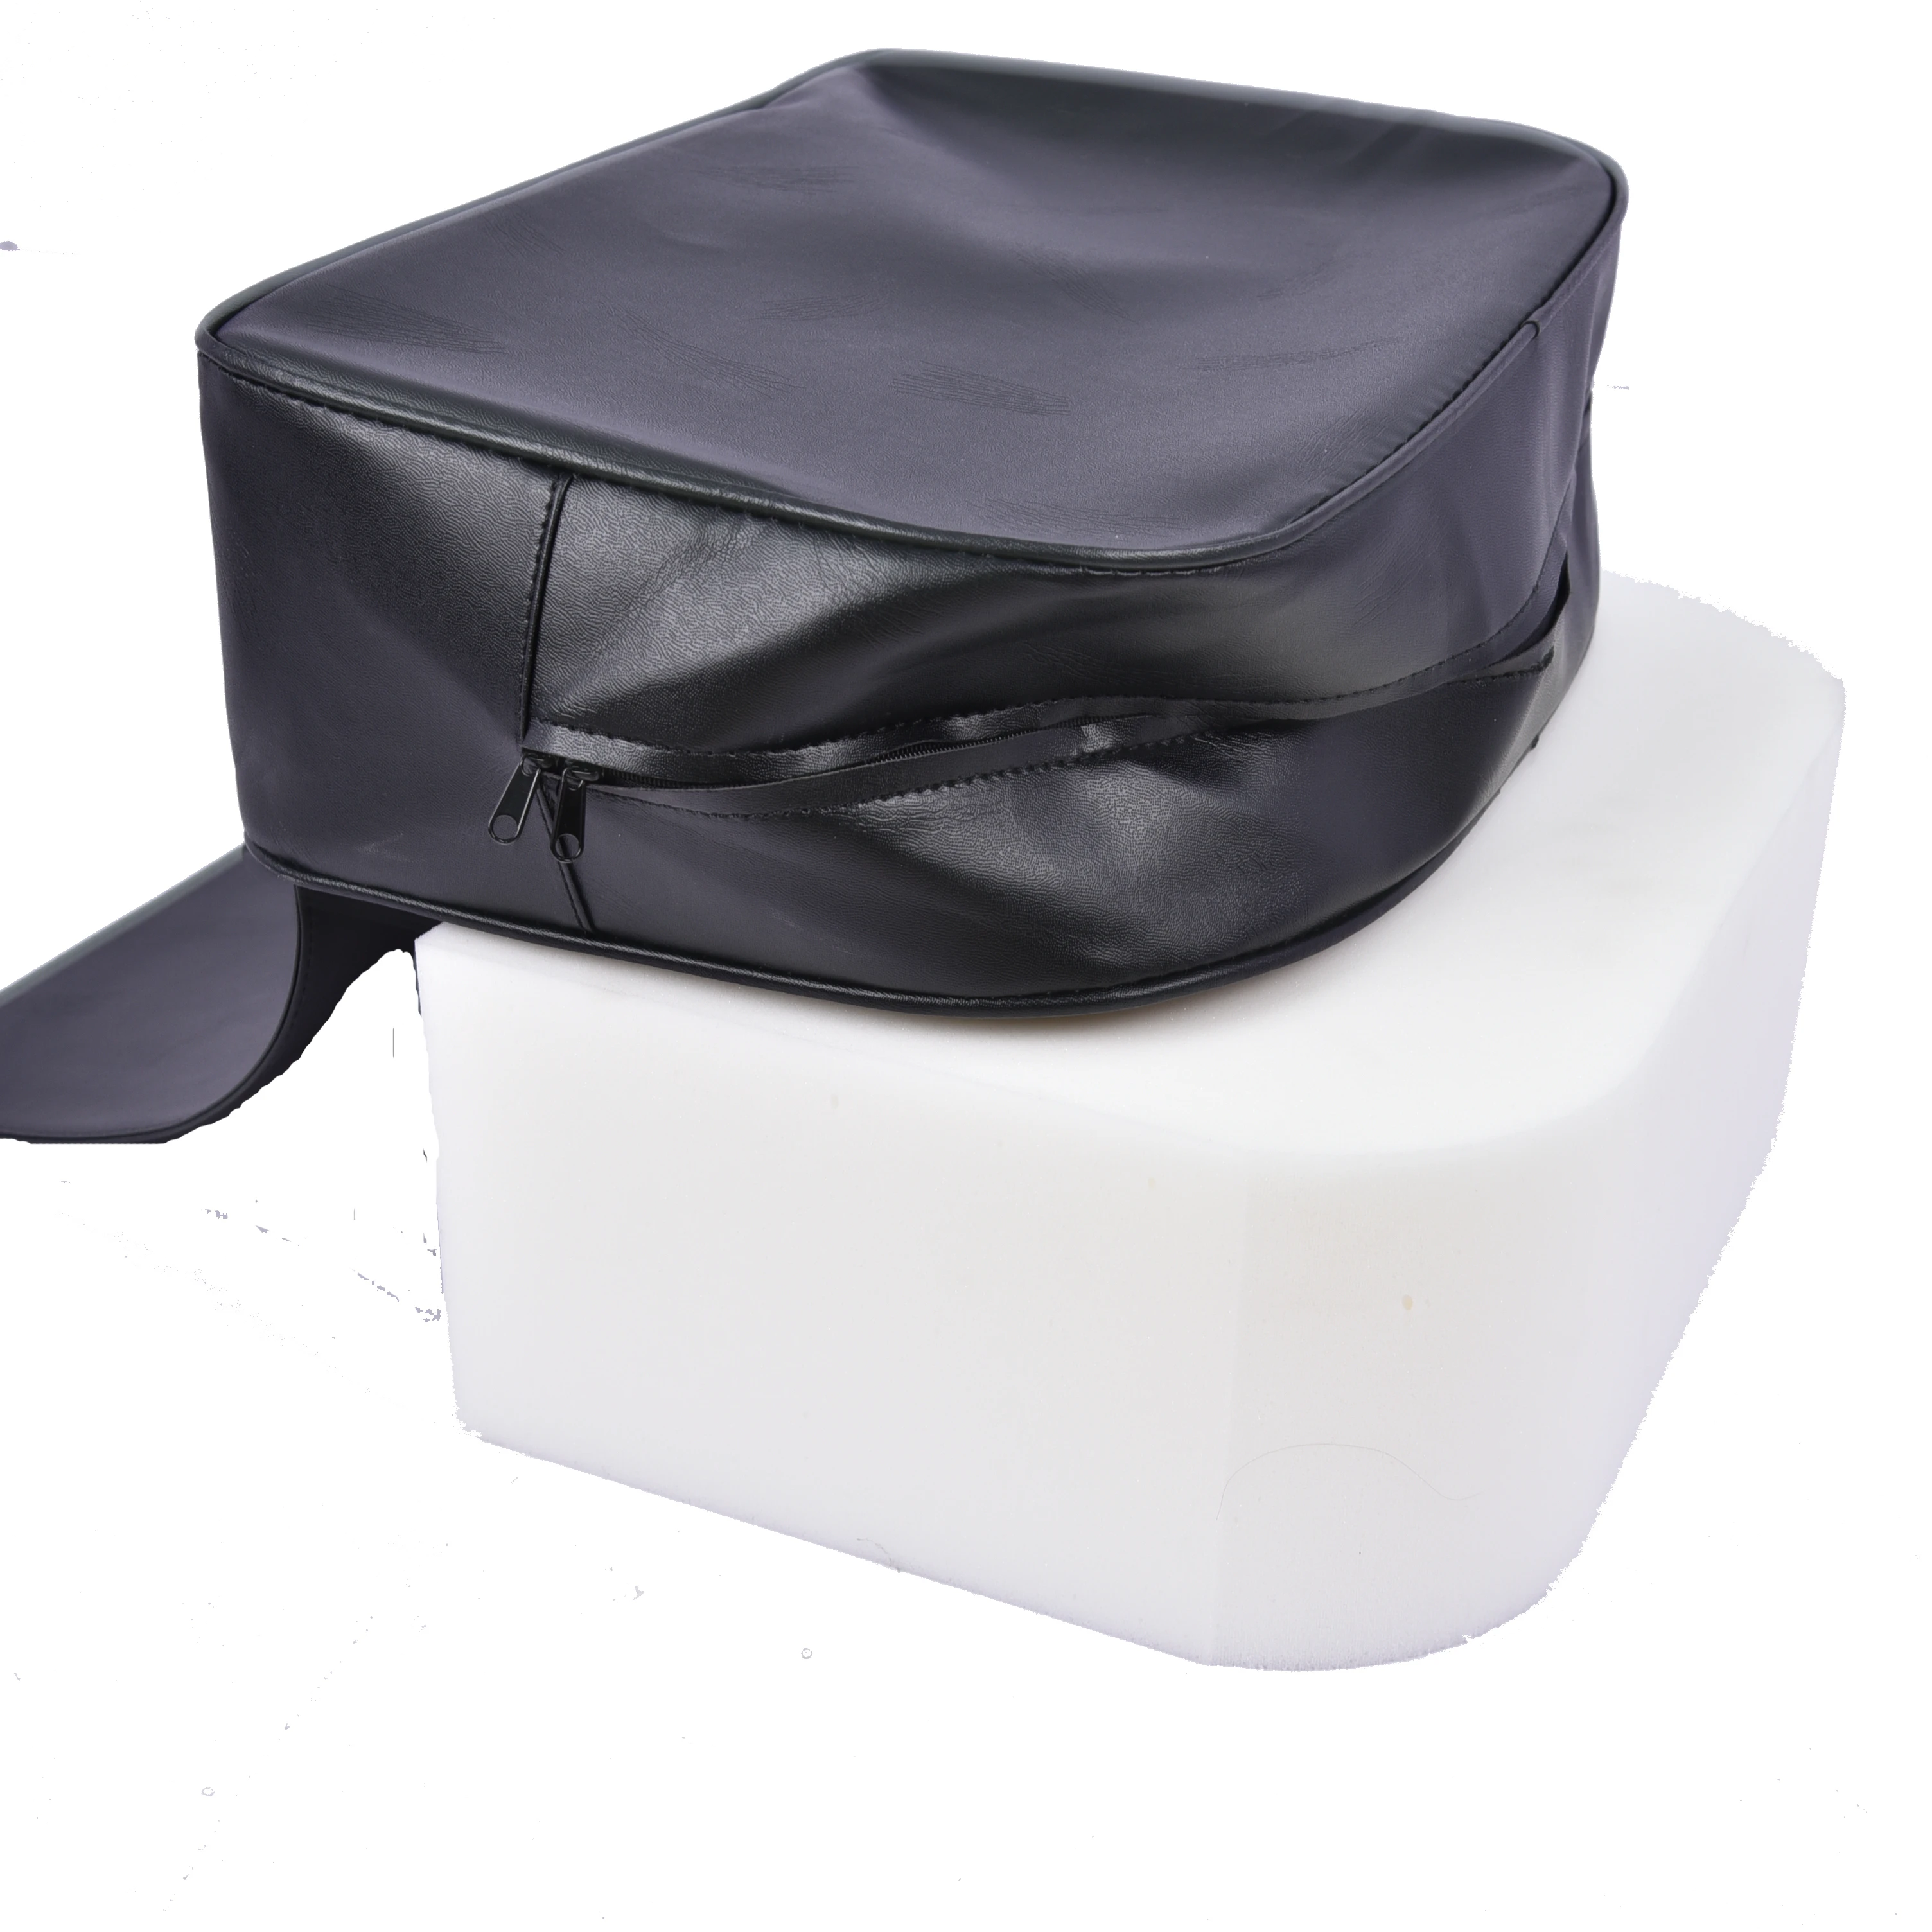 Barber Shop Hairdressing Equipment Portable Salon Chair Booster Seat  Cushion For Child Hair Cutting - Buy Cushion For Styling Chair,Salon  Booster Seat Cushion,Barber Chair Child Booster Seat Product on 